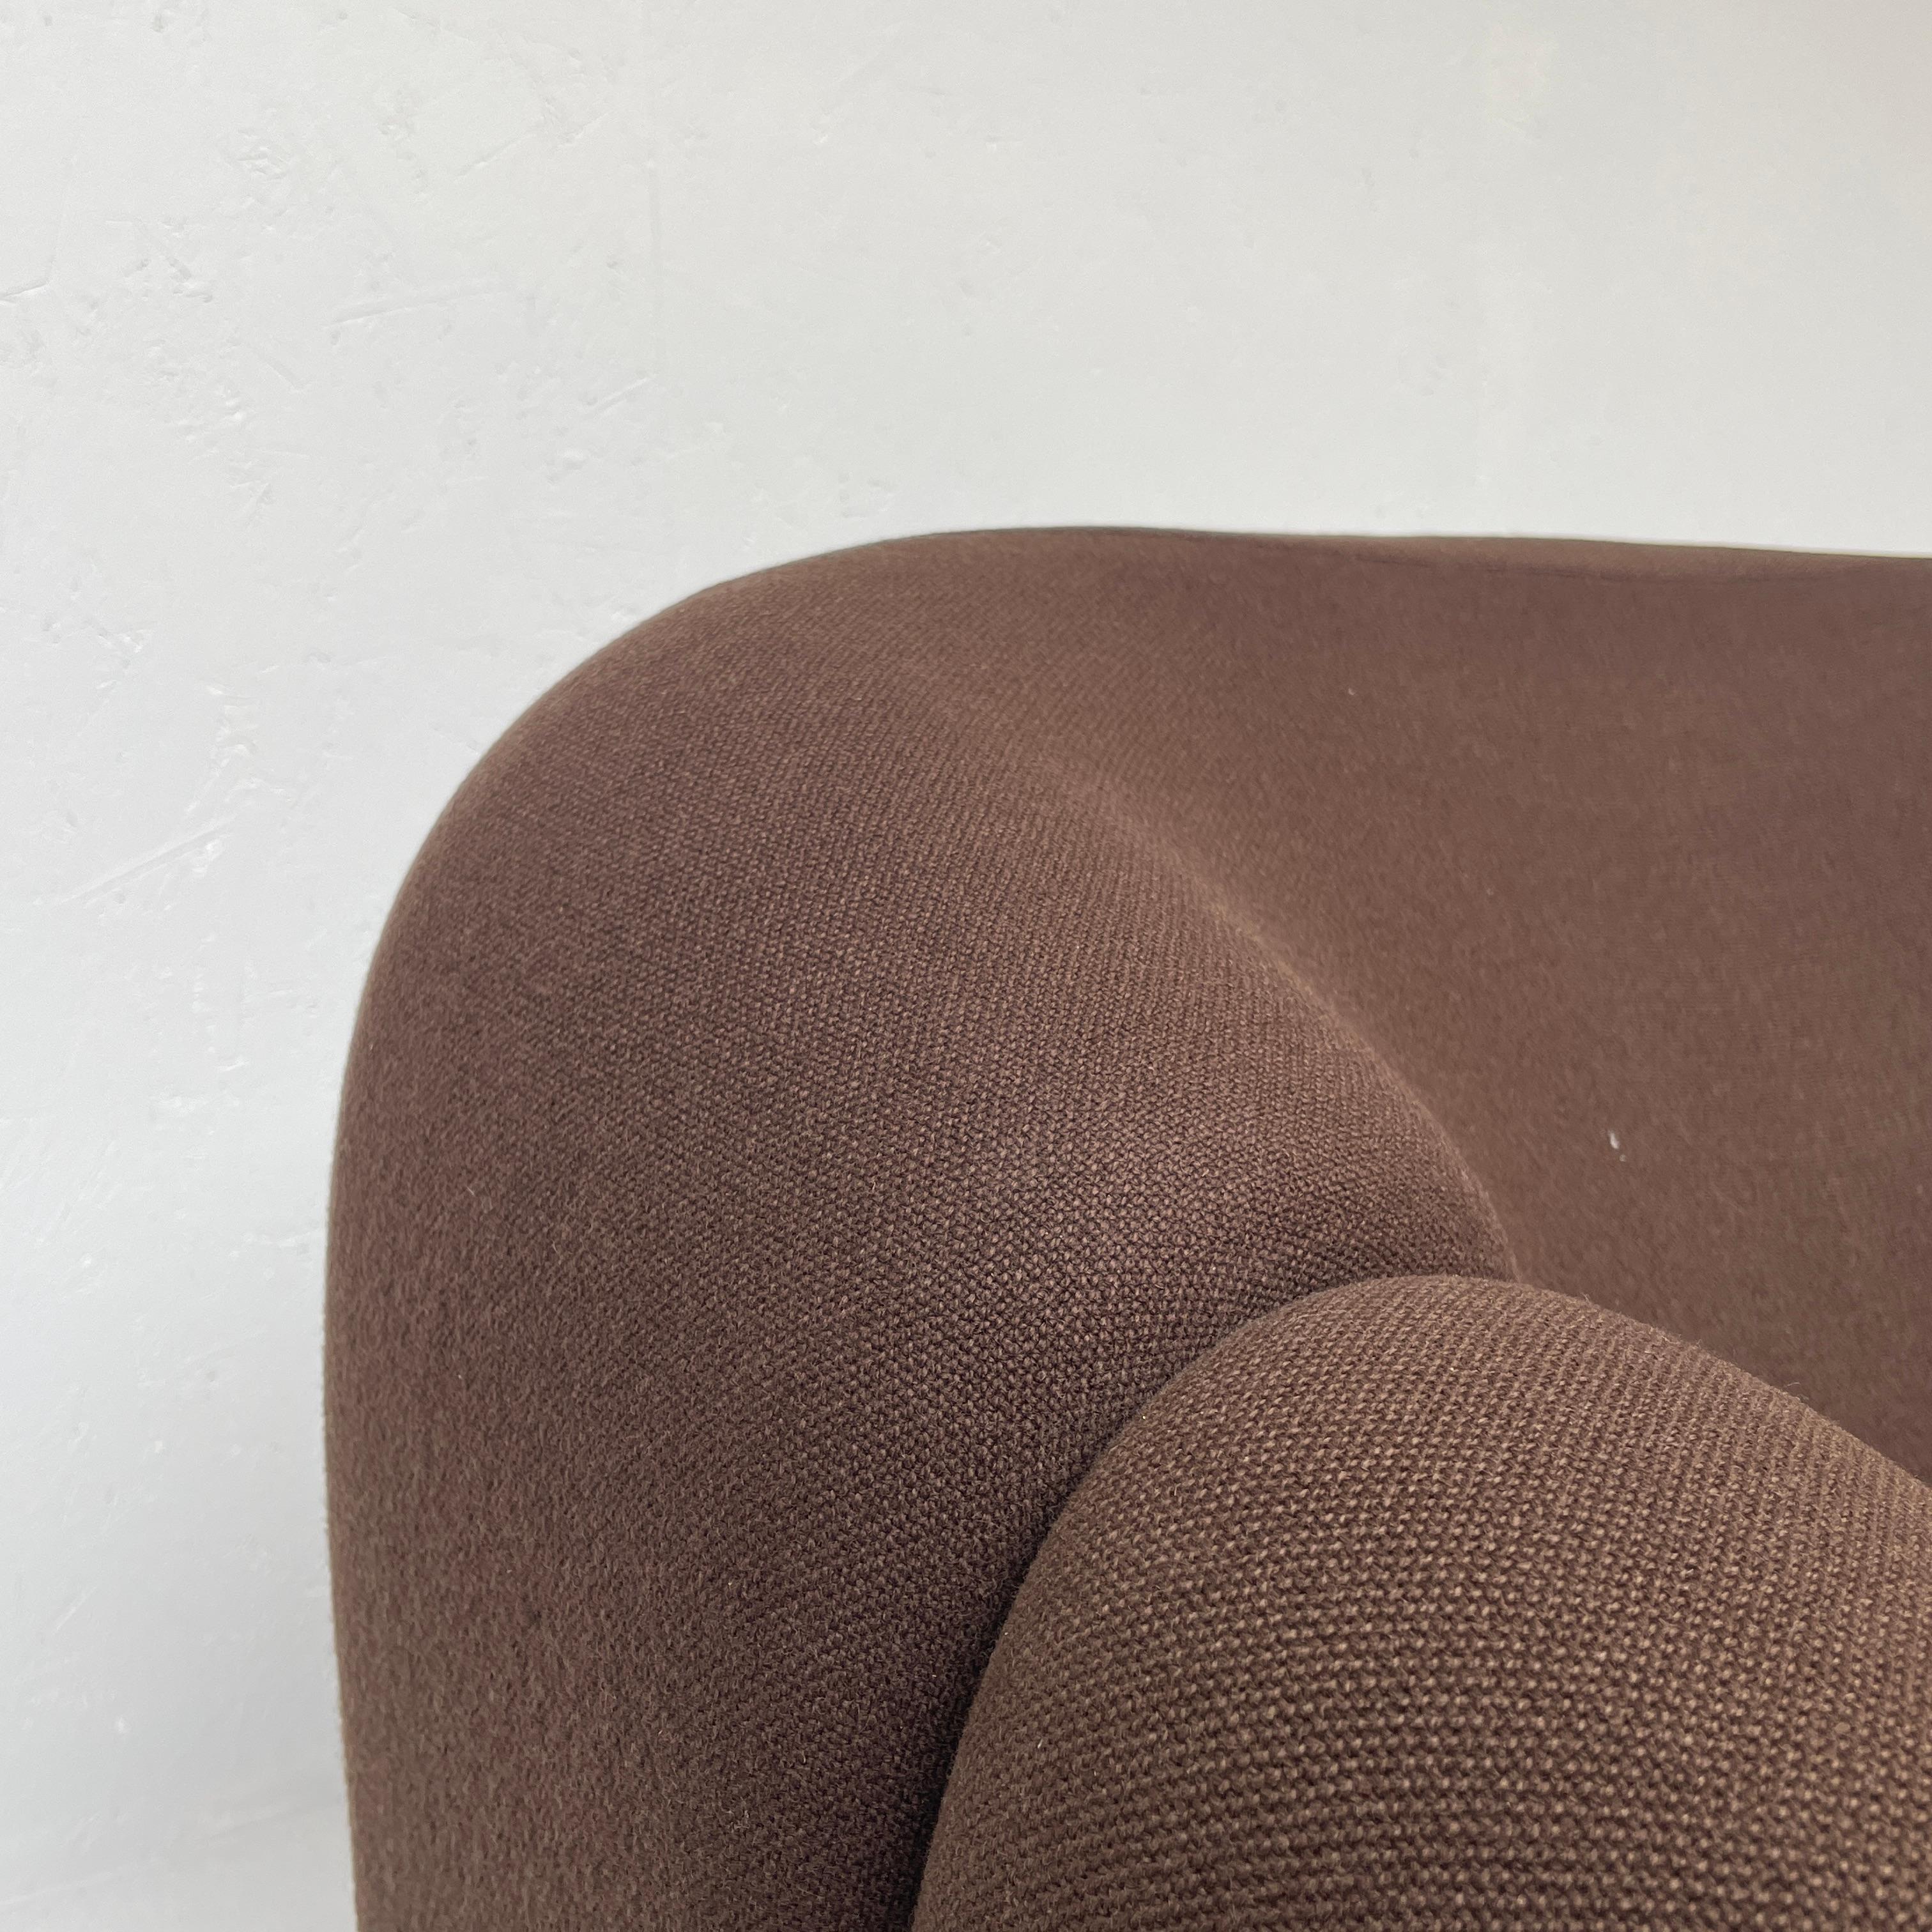 The Groovy chair, or F598, was designed in 1973 by France’s top designer Pierre Paulin for Holland’s most Avant-Garde furniture maker Artifort. 
Their compactness combined with great comfort and of course, iconic looks made this chair one of the